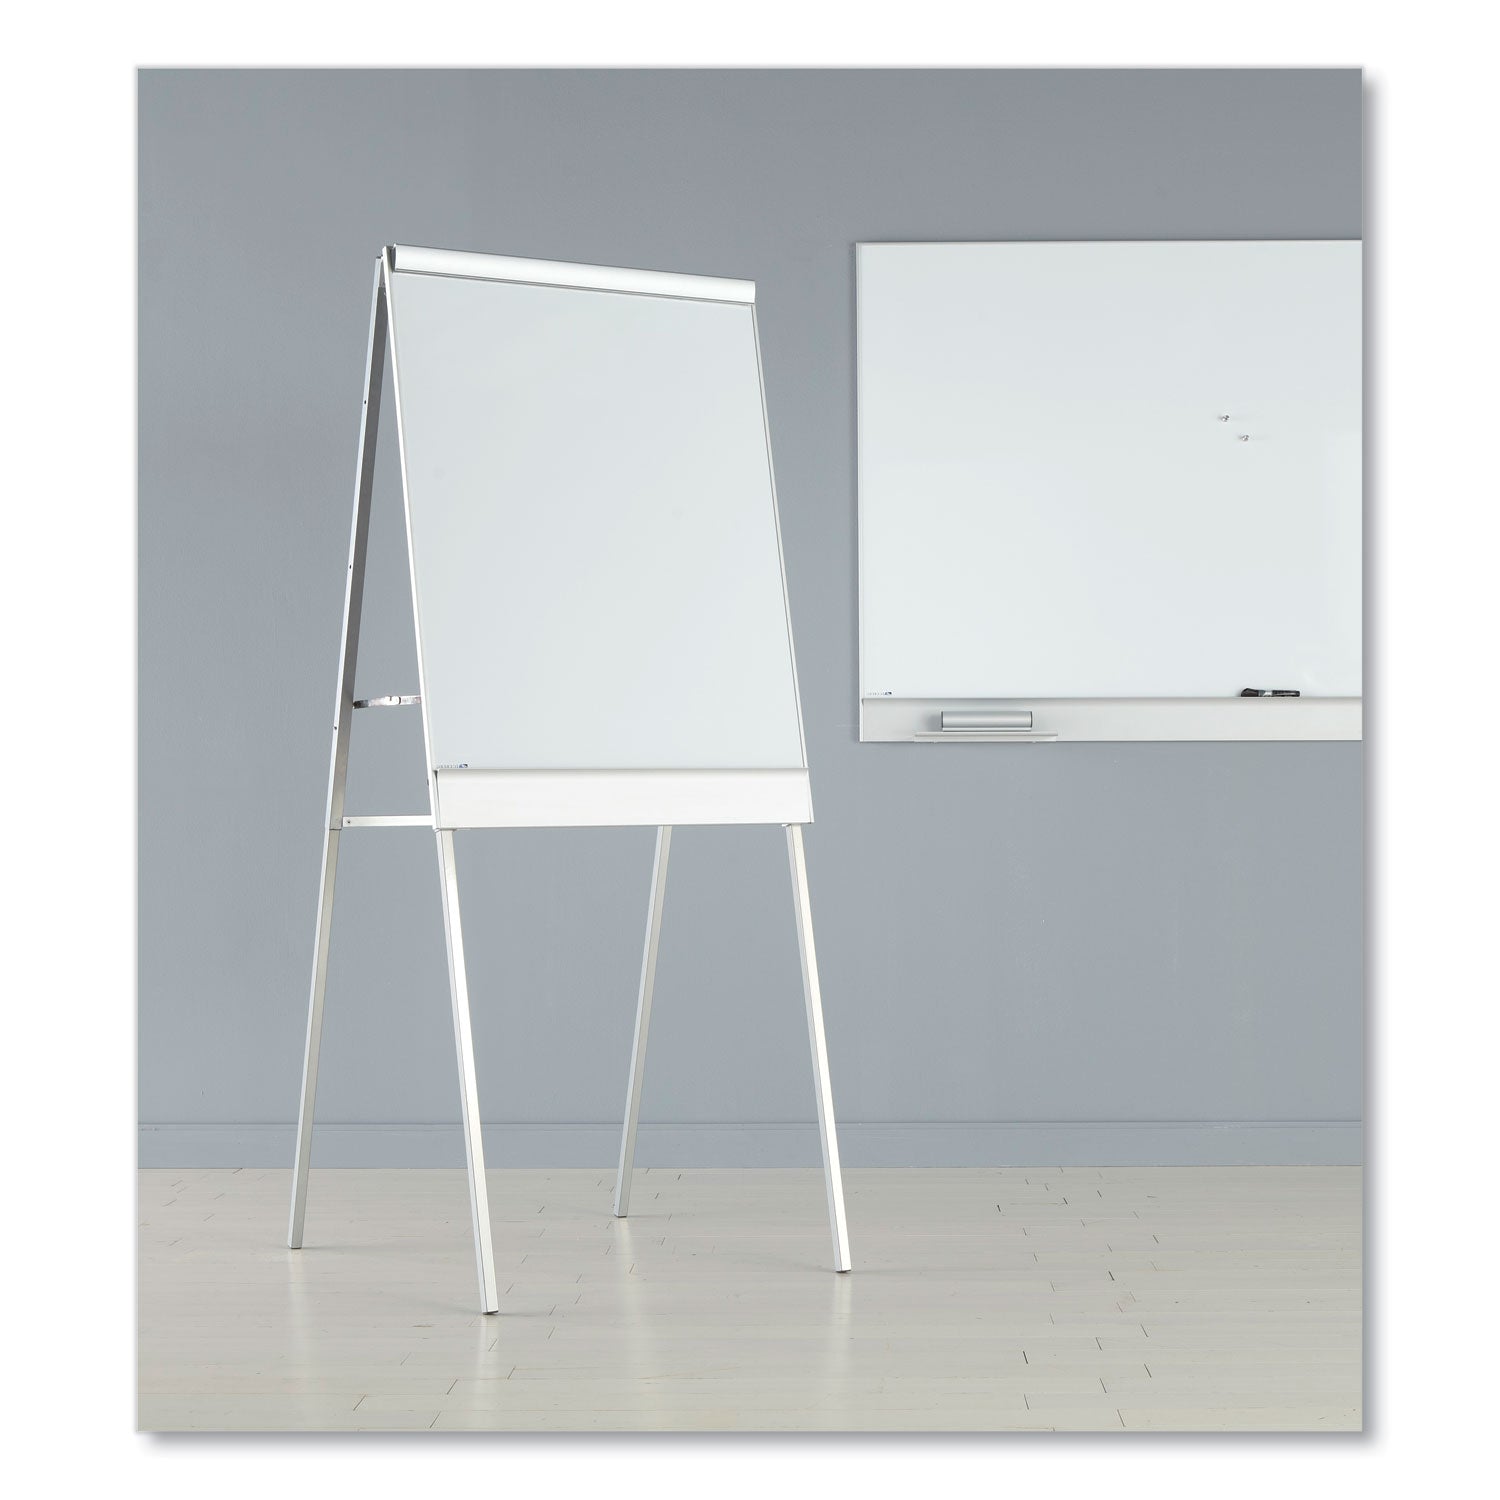 polarity-height-adjustable-dry-erase-flipchart-easel-30-x-20-31-x-50-74-easel-30-x-38-board-white-surface-silver-frame_ice30333 - 4